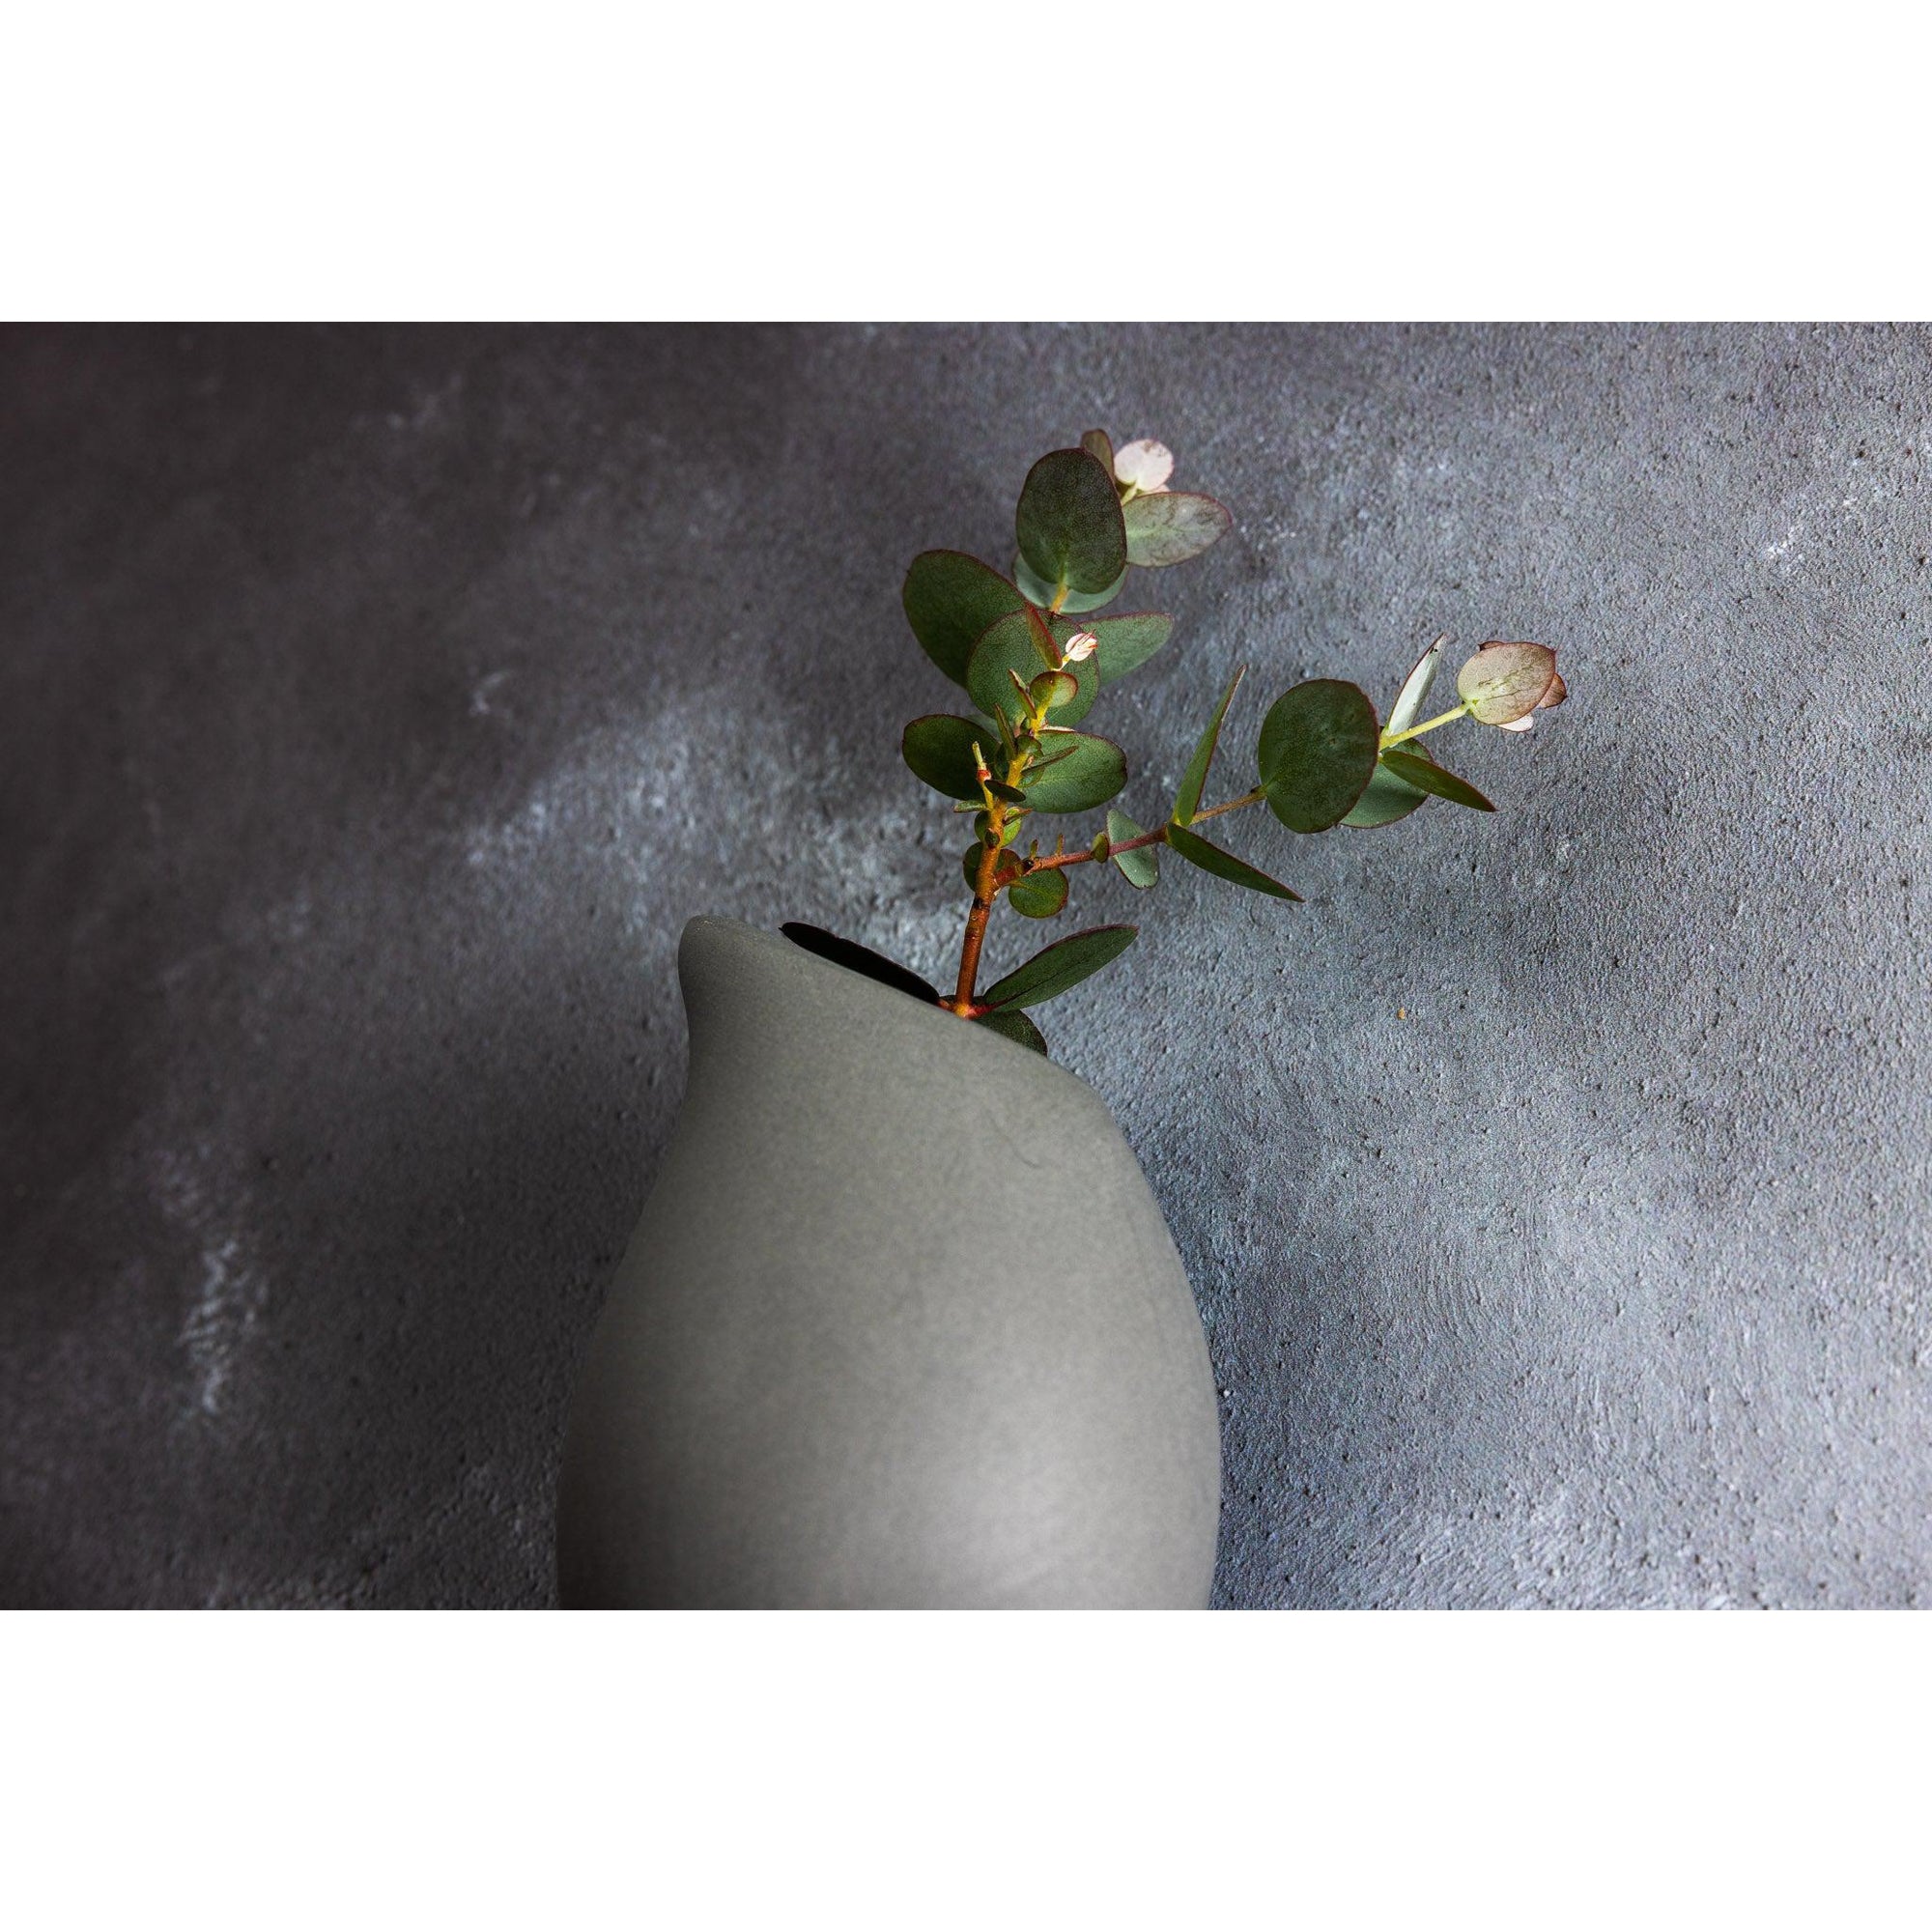 KSQ1 Droplet Wall Vase by Kate Schuricht, available at Padstow Gallery, Cornwall